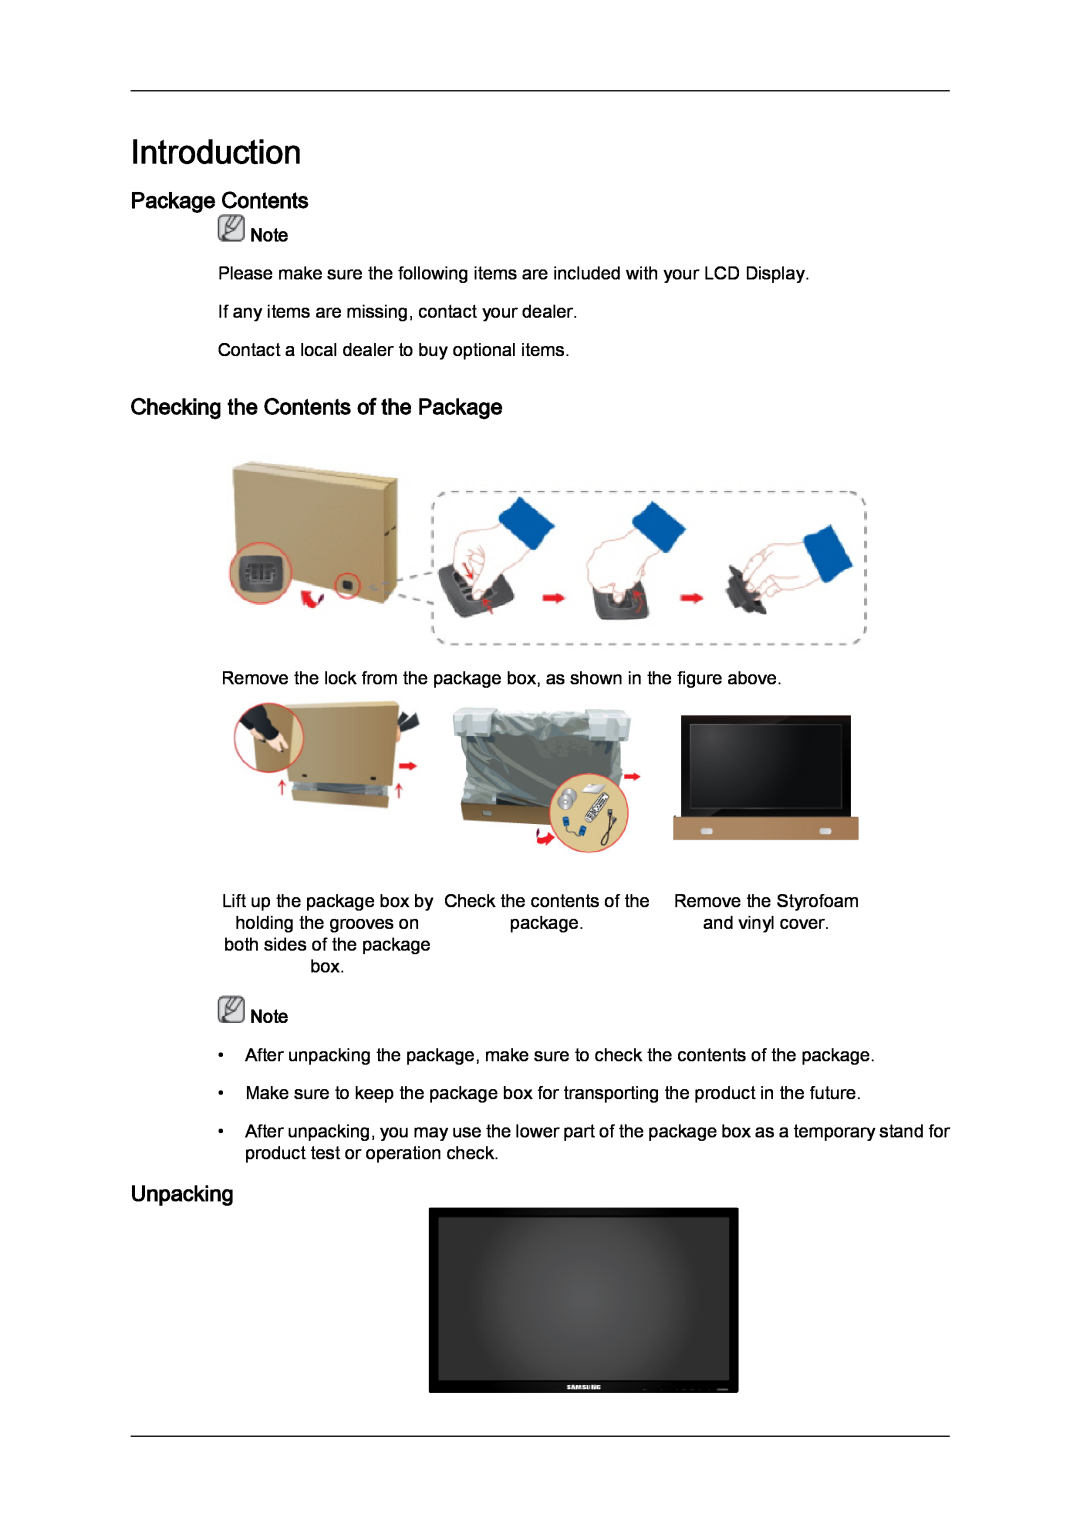 Samsung 650MP-2, 650FP-2 user manual Introduction, Package Contents, Checking the Contents of the Package, Unpacking 